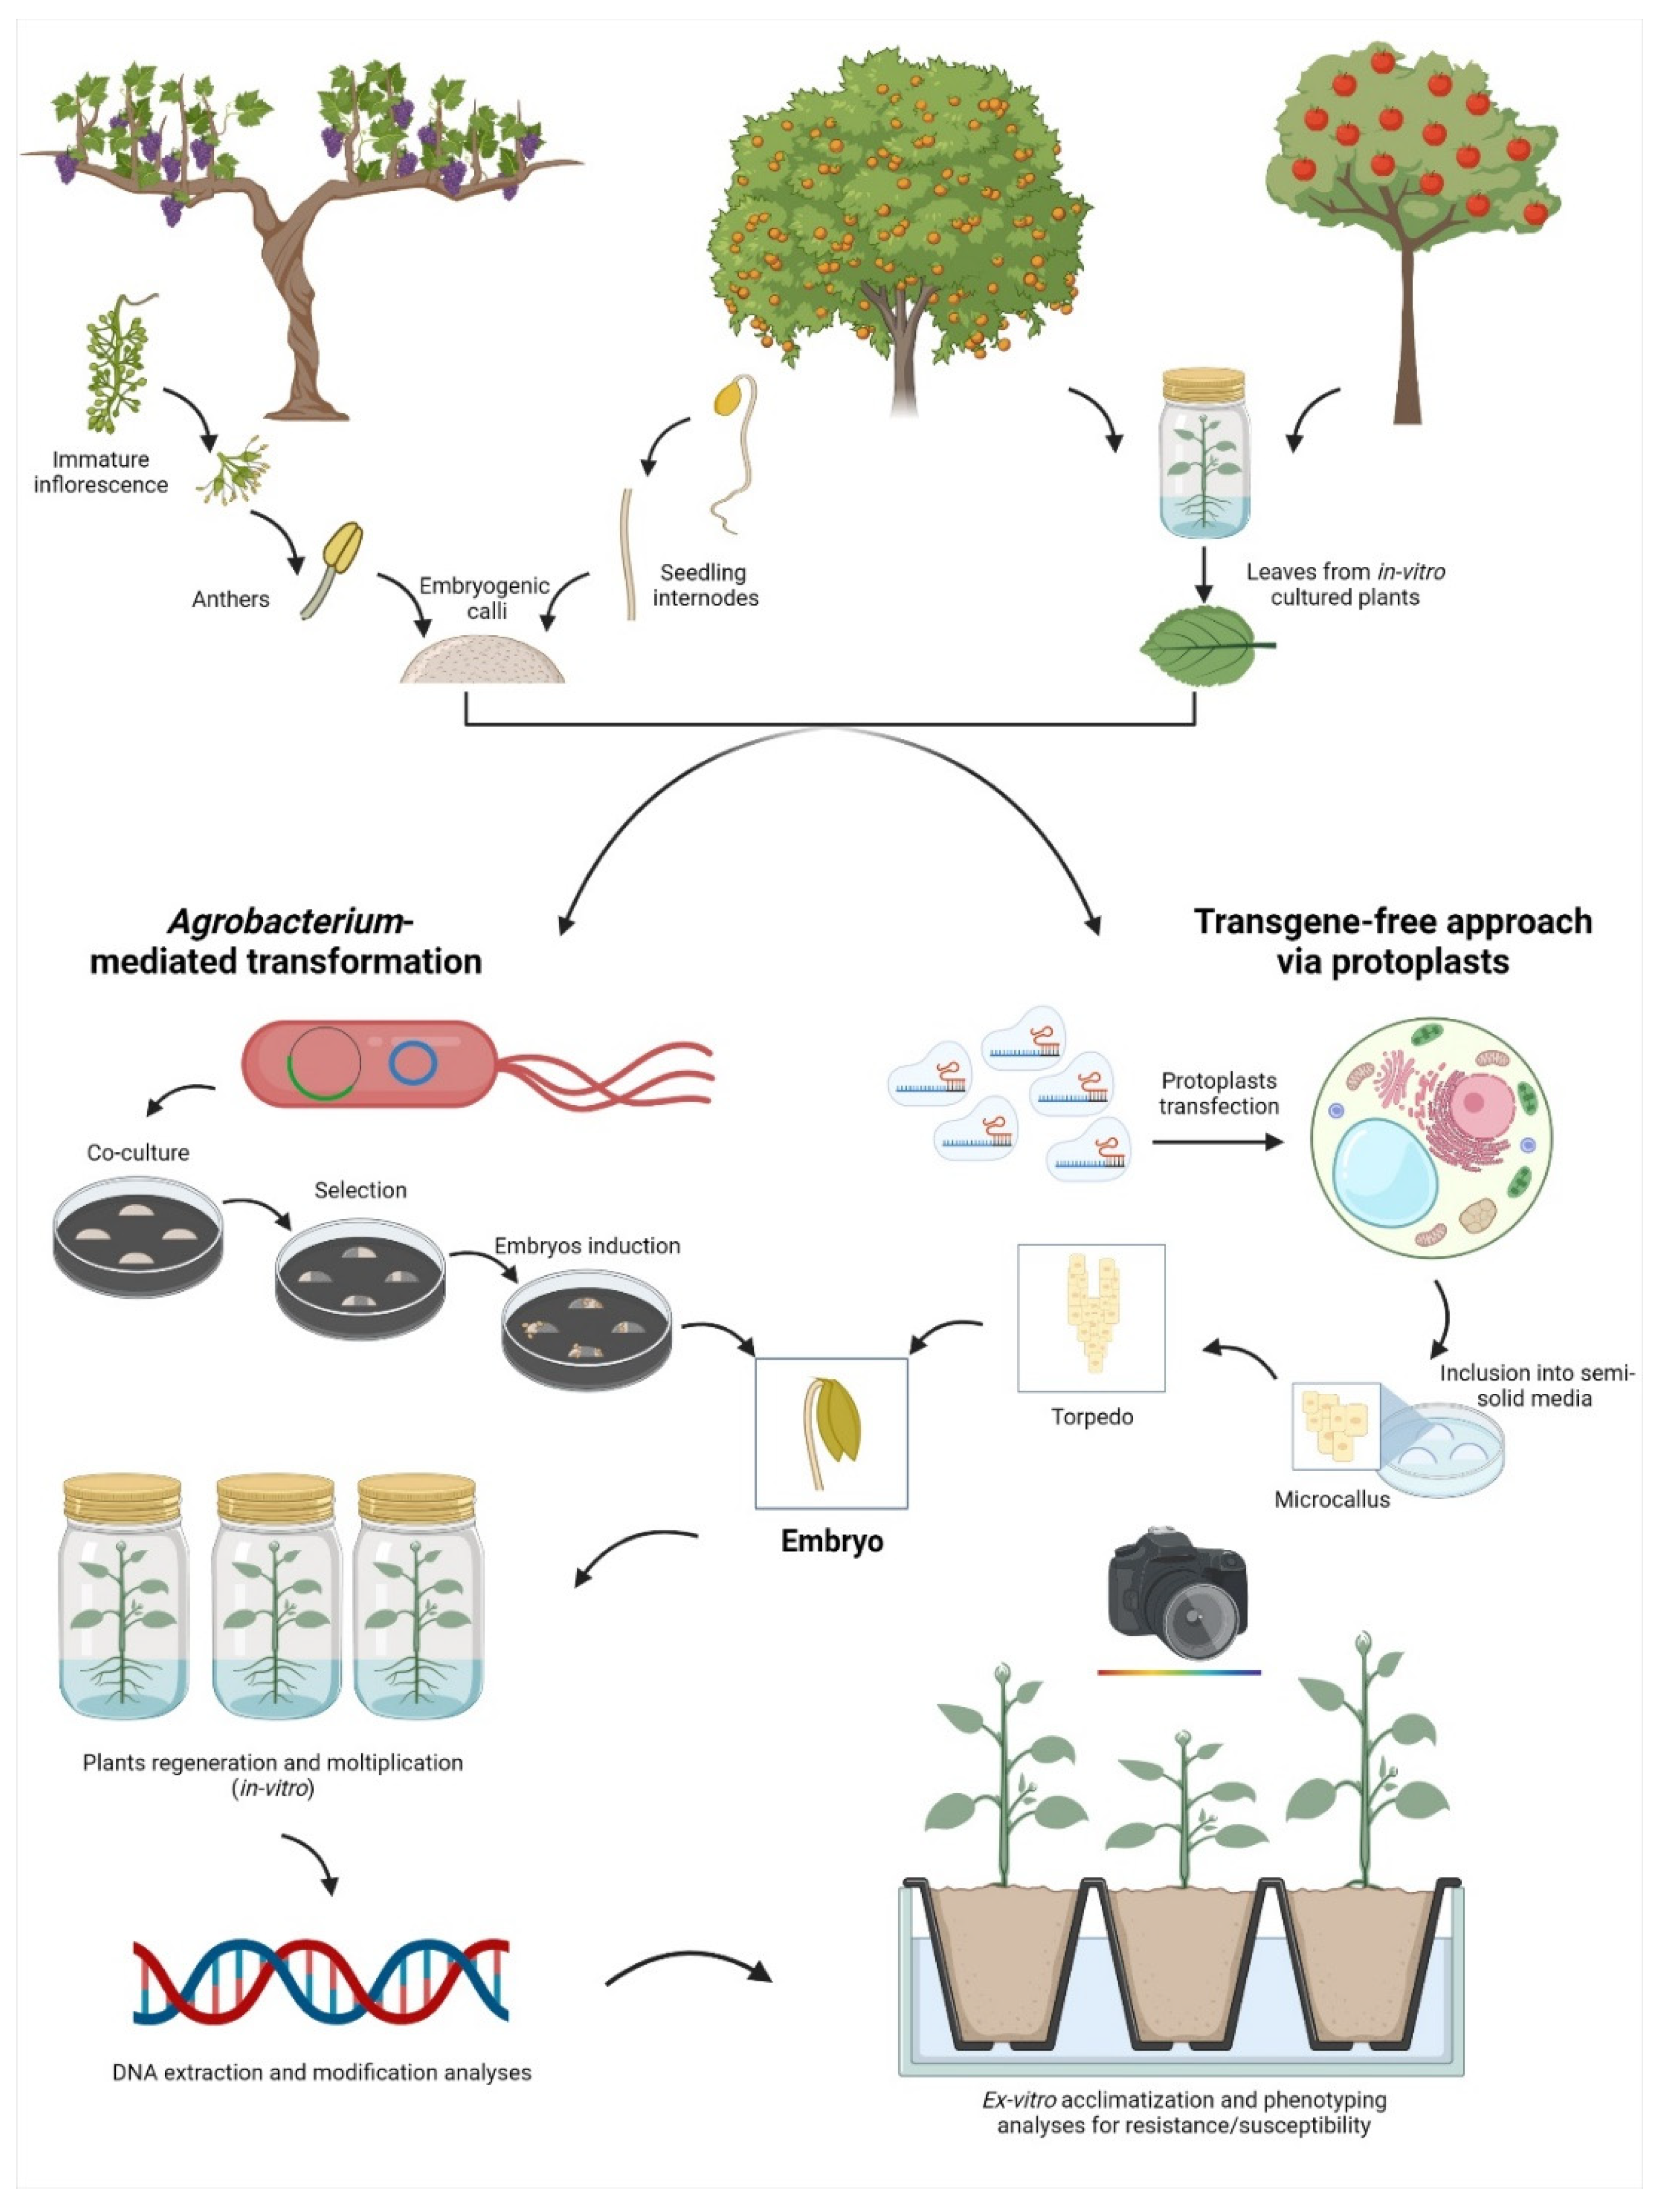 IJMS | Free Full-Text | The Role of Italy in the Use of Advanced Plant  Genomic Techniques on Fruit Trees: State of the Art and Future Perspectives